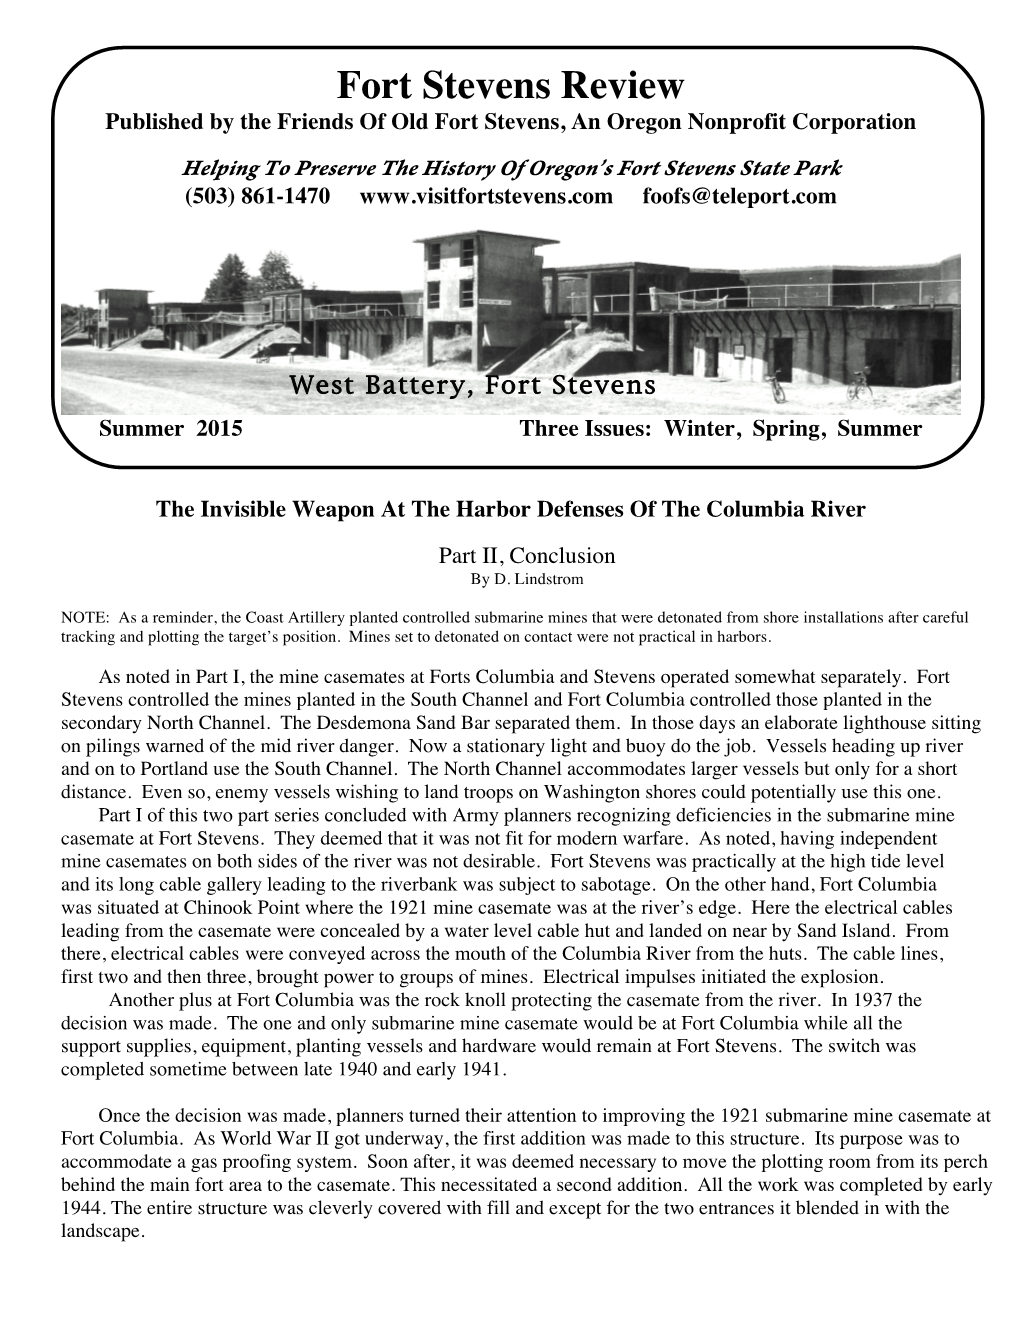 Fort Stevens Review Published by the Friends of Old Fort Stevens, an Oregon Nonprofit Corporation